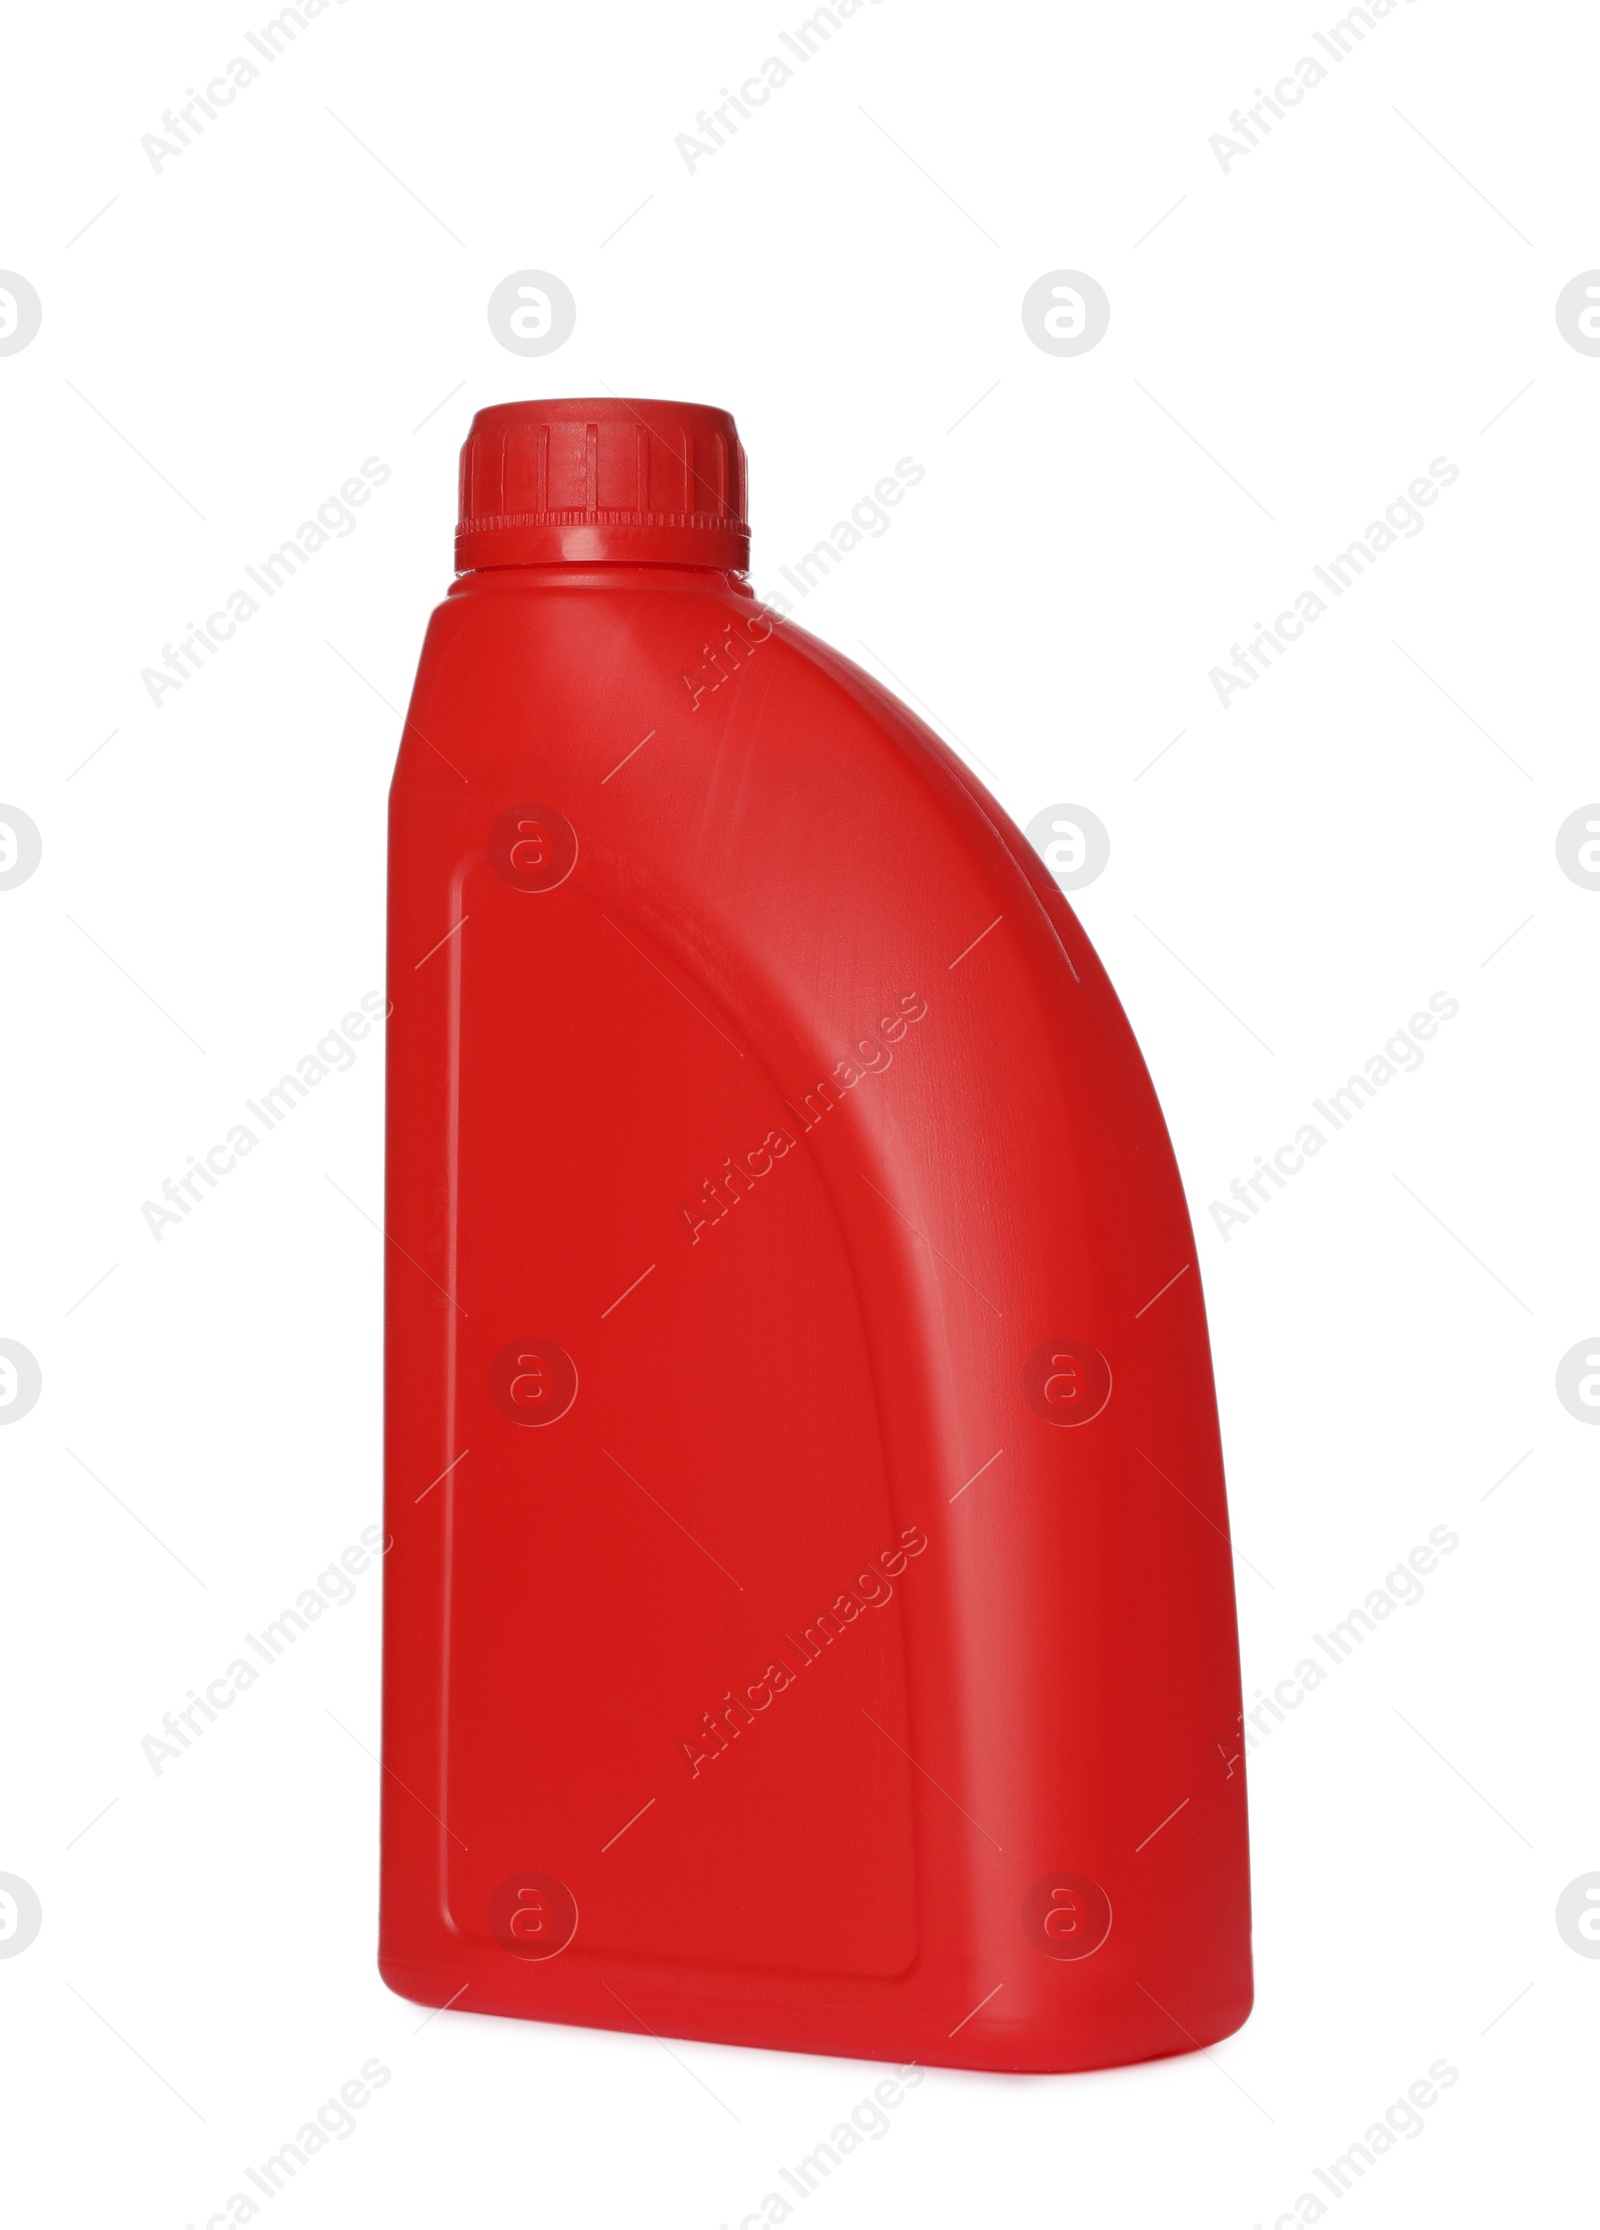 Photo of Motor oil in red container isolated on white